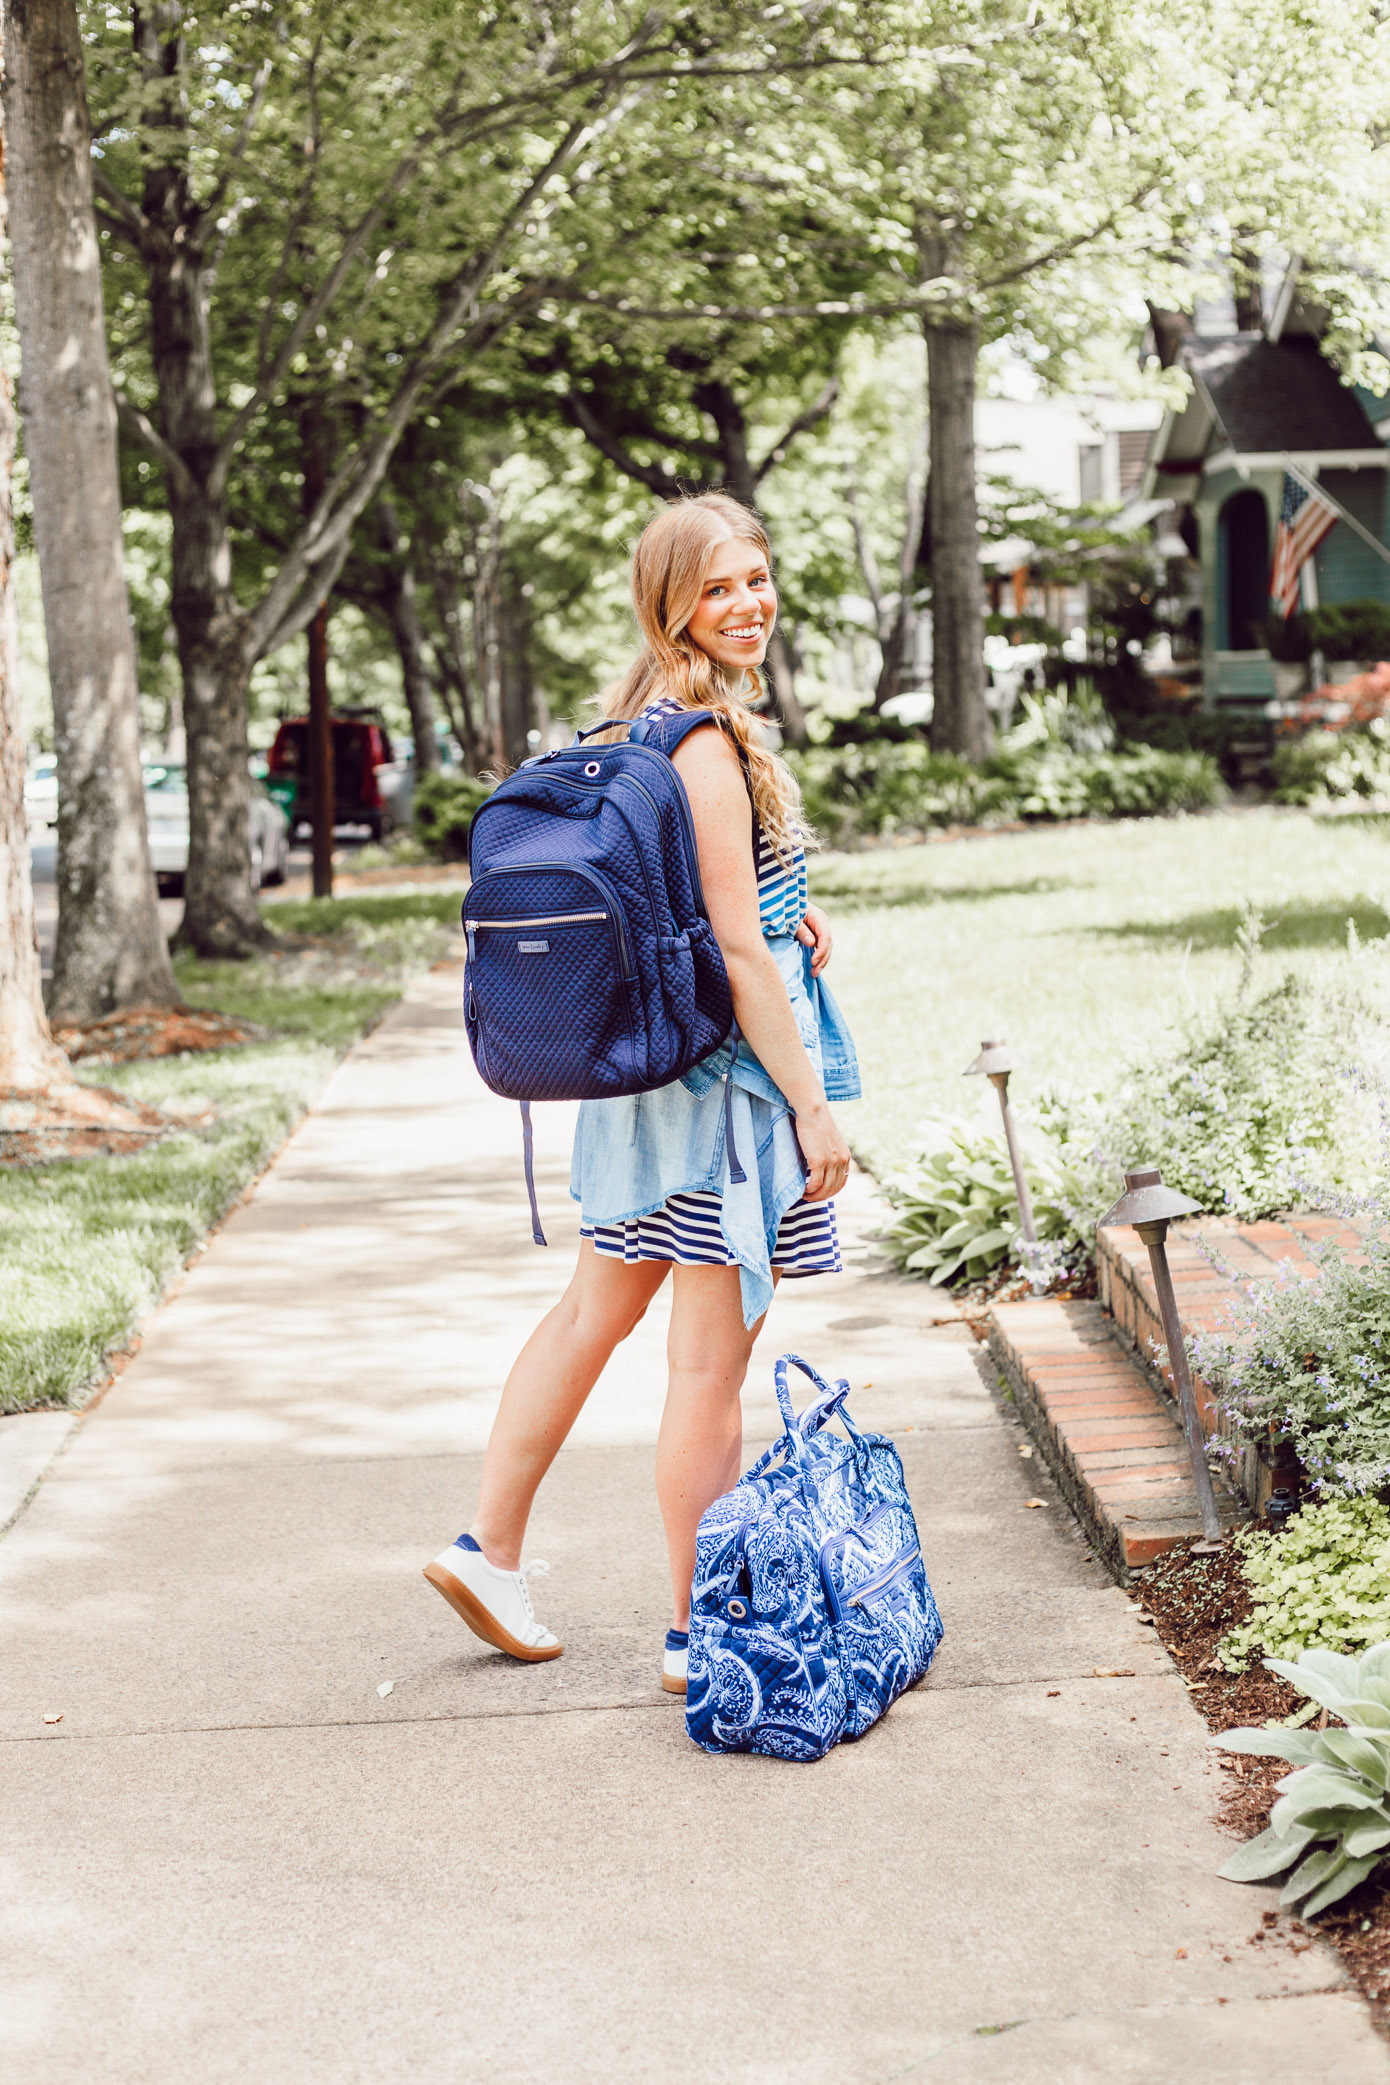 Summer Travel Packing Tips | Casual Summer Travel Outfit and Perfect Travel Backpack | Louella Reese Life & Style Blog